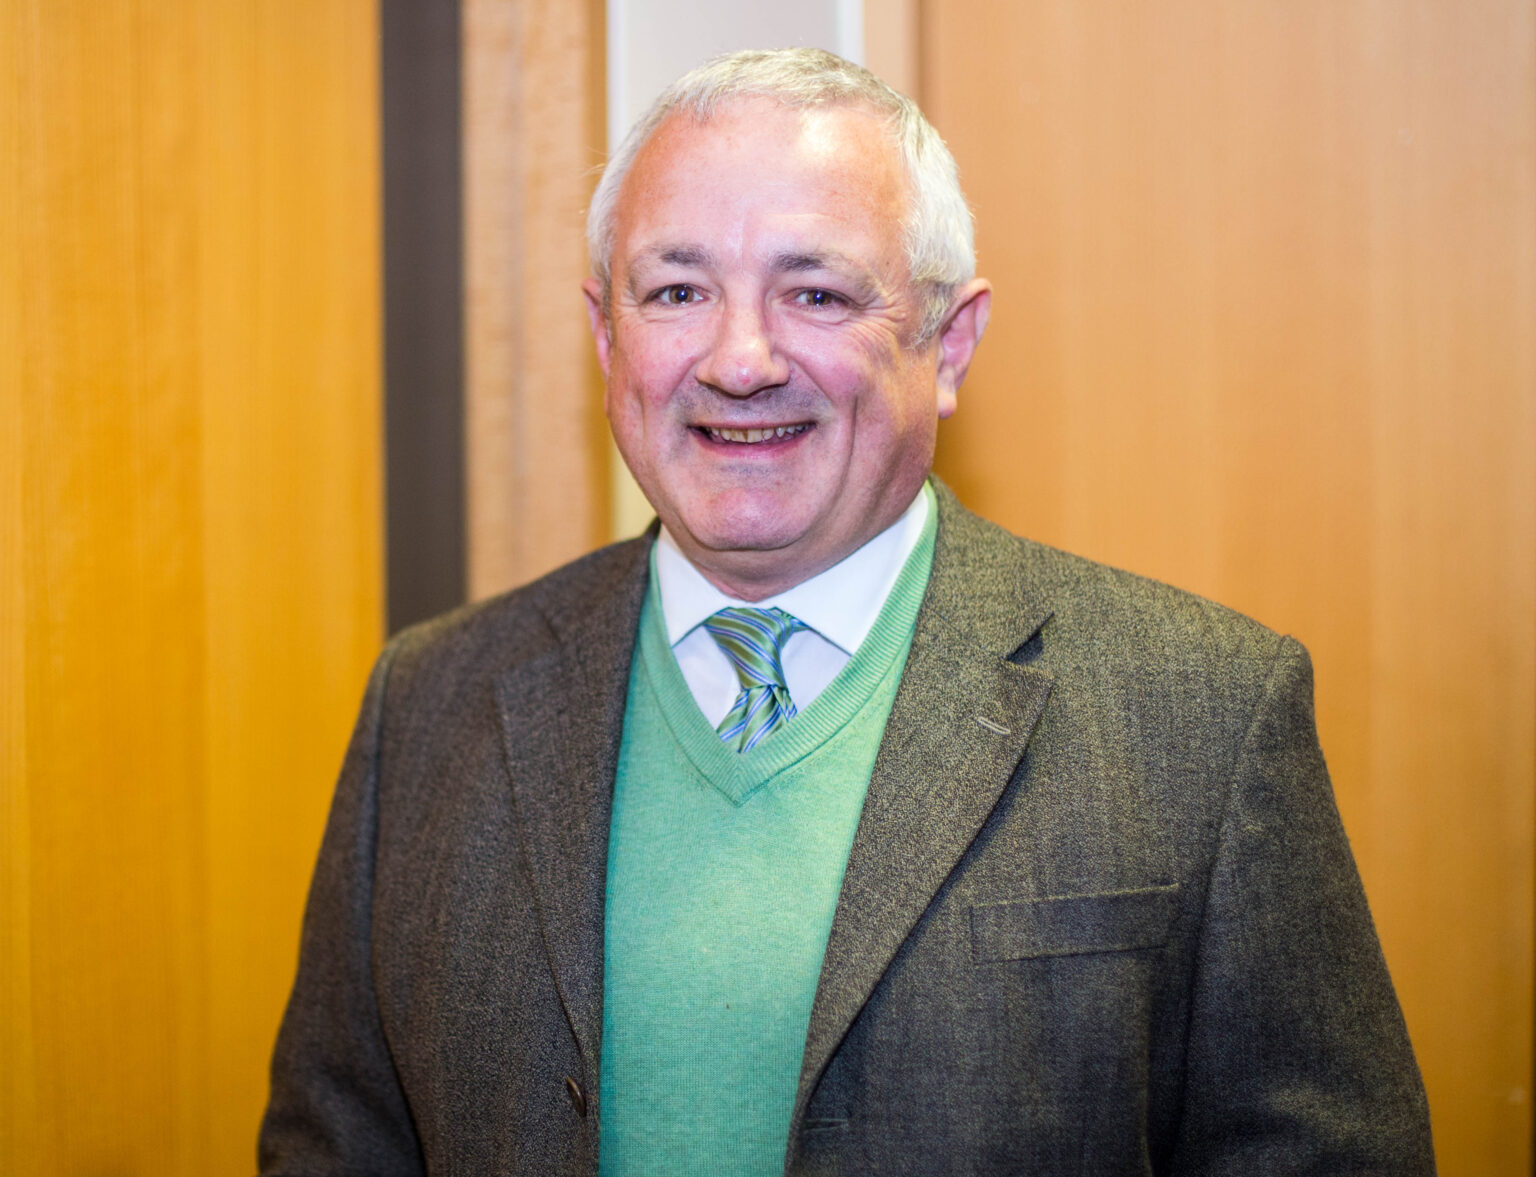 Jerry O Dea pictured above. The Fianna Fáil representative for the Limerick City East constituency died suddenly over the weekend at the age of 55.